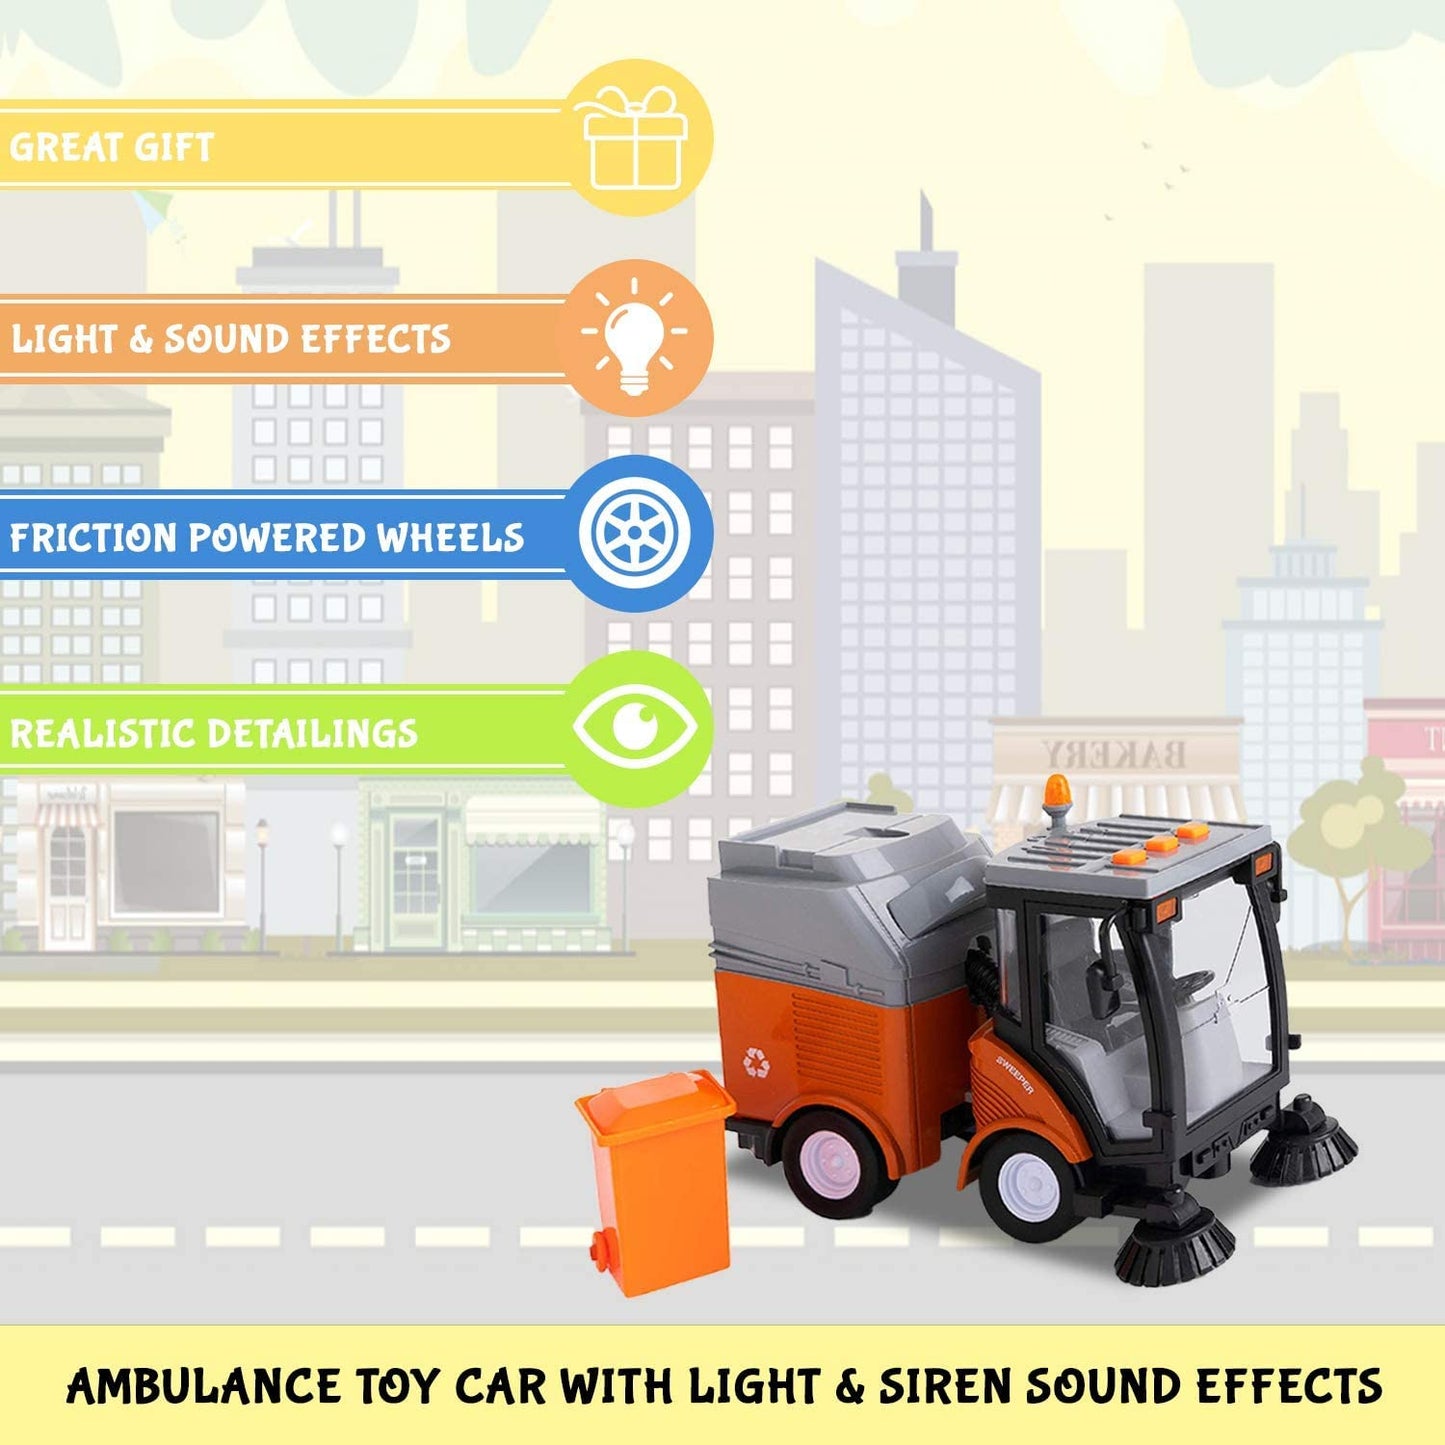 Street Sweeper Truck with Light & Sound Effects - Friction Powered Wheels, Removable Garbage Can & Rotating Brushes - Heavy Duty Plastic Cleaning Vehicle Toy for Kids & Children by Toy to Enjoy